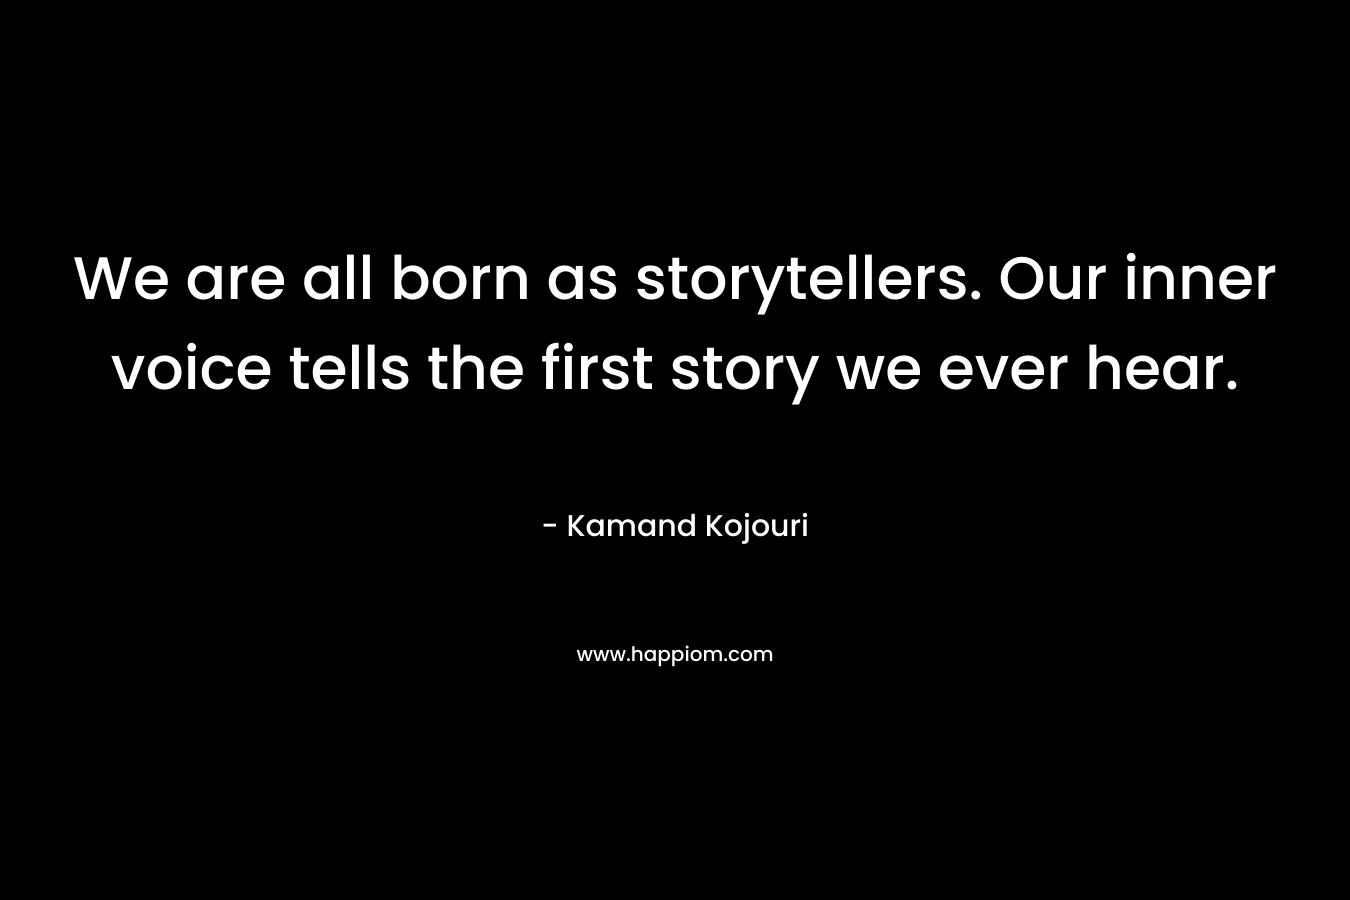 We are all born as storytellers. Our inner voice tells the first story we ever hear.